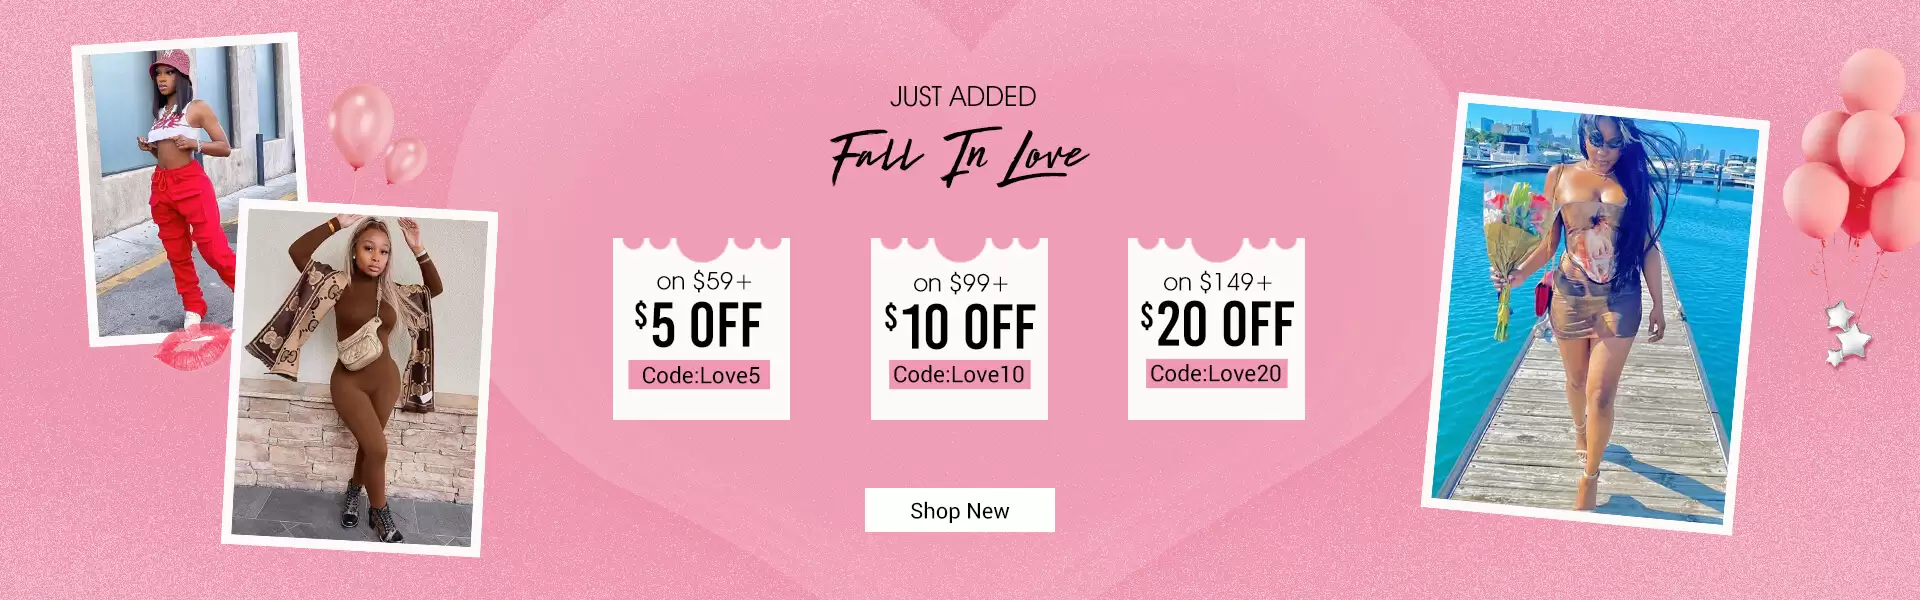 Get $5 To $20 Off With This Discount Coupon At Jurllyshe.Com